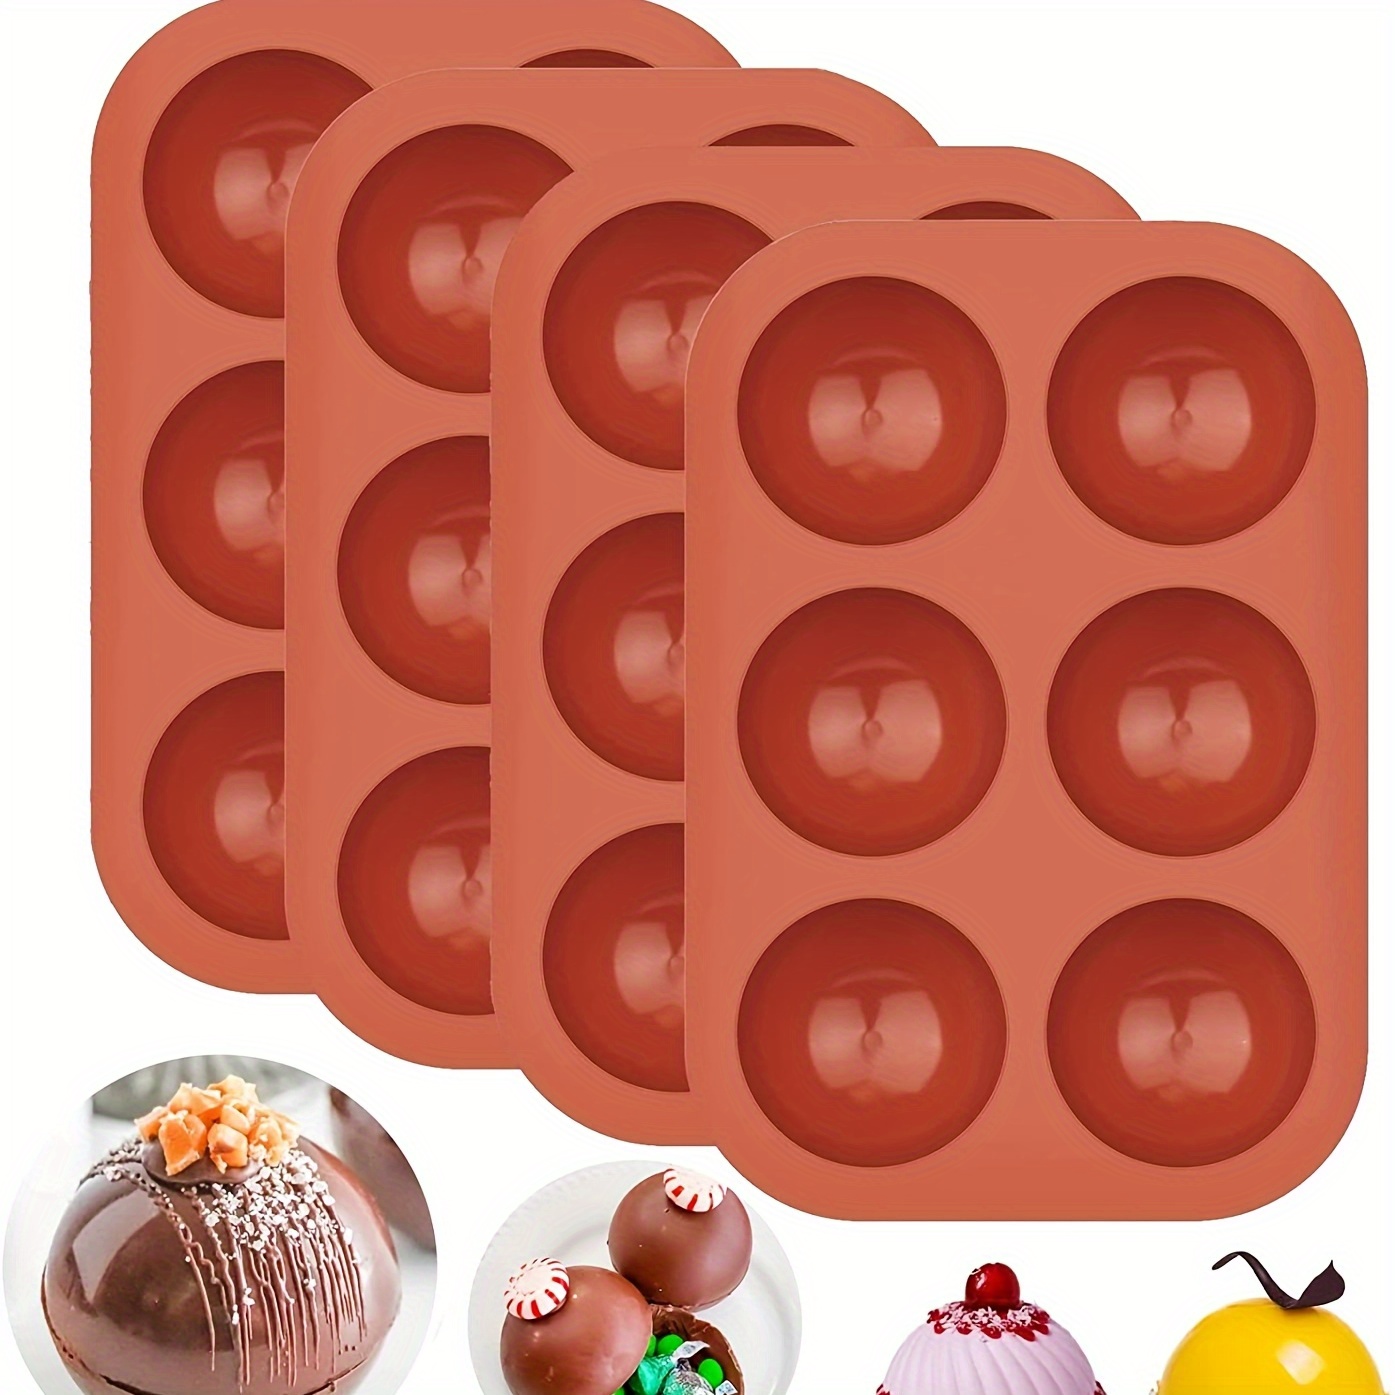 

1pc Silicone Chocolate Mold For Hot Chocolate Bombs - 6 Cavity Dome Shaped Jelly Molds For Making Cocoa Balls, Pudding And Ice Cream